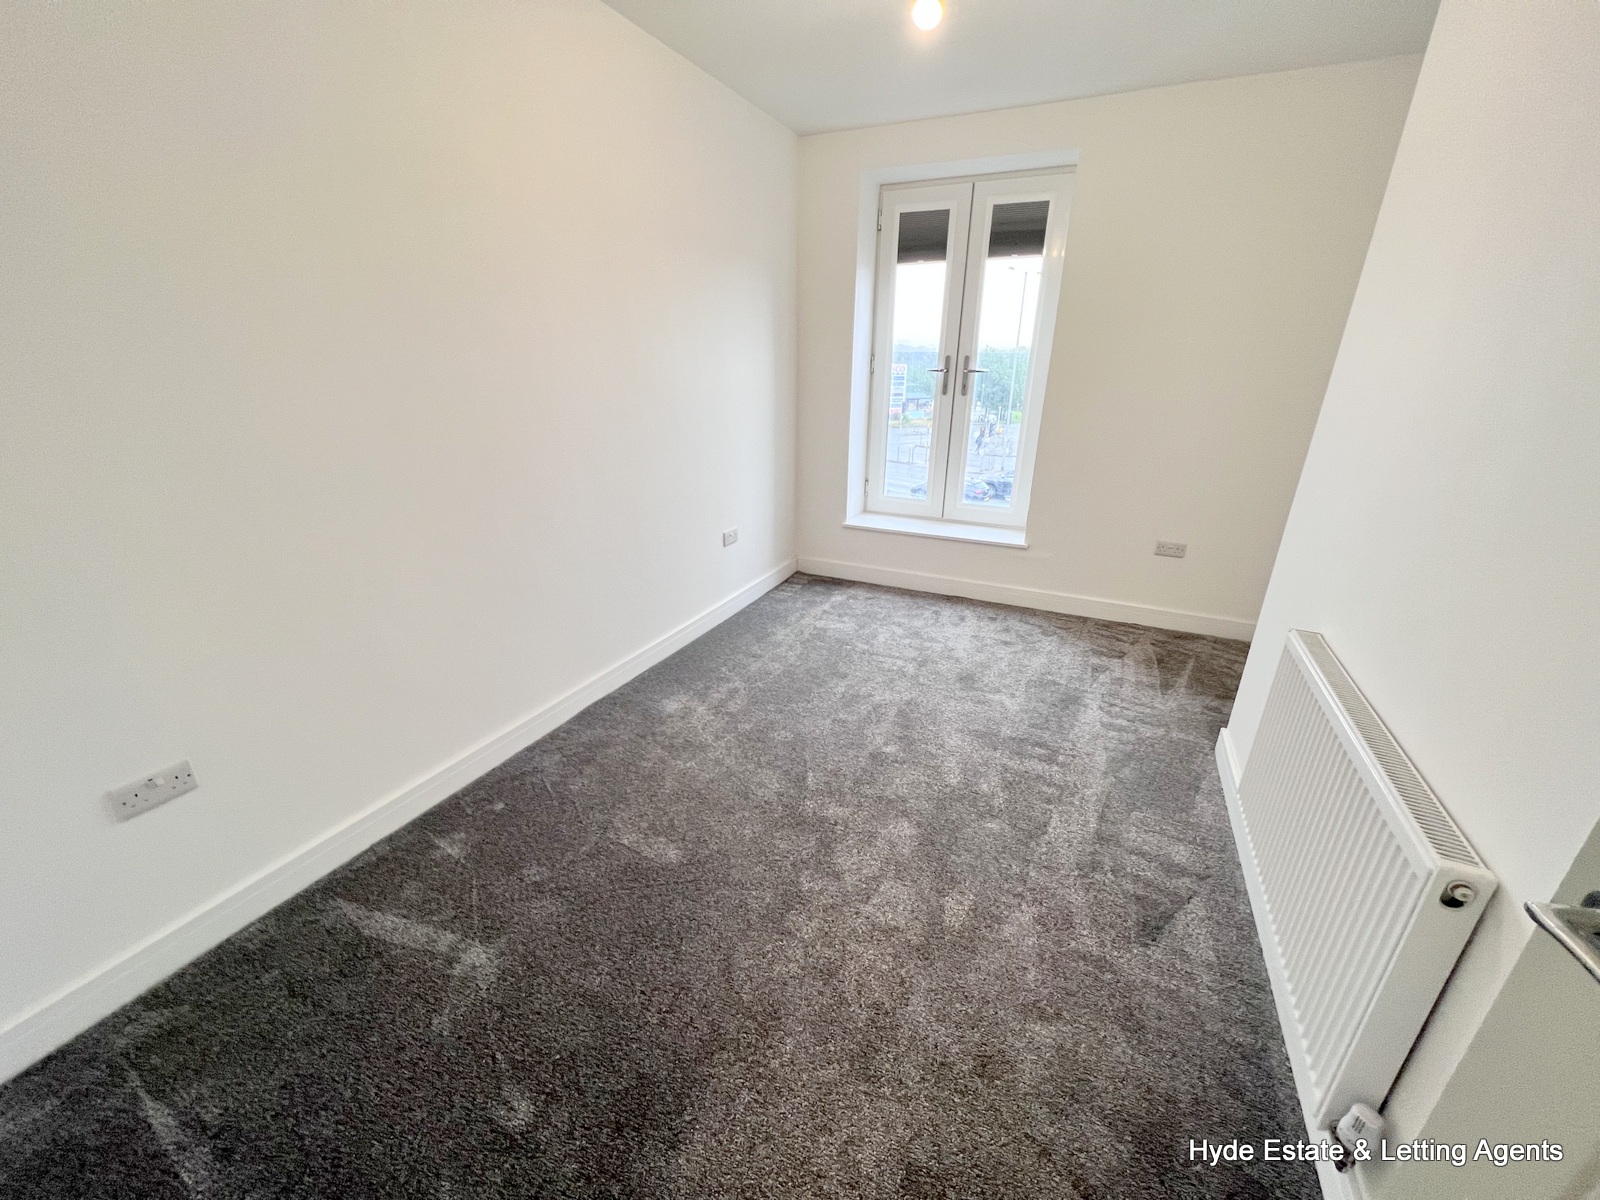 Images for Flat 3 Parsons Lane, Bury, BL9 0LY